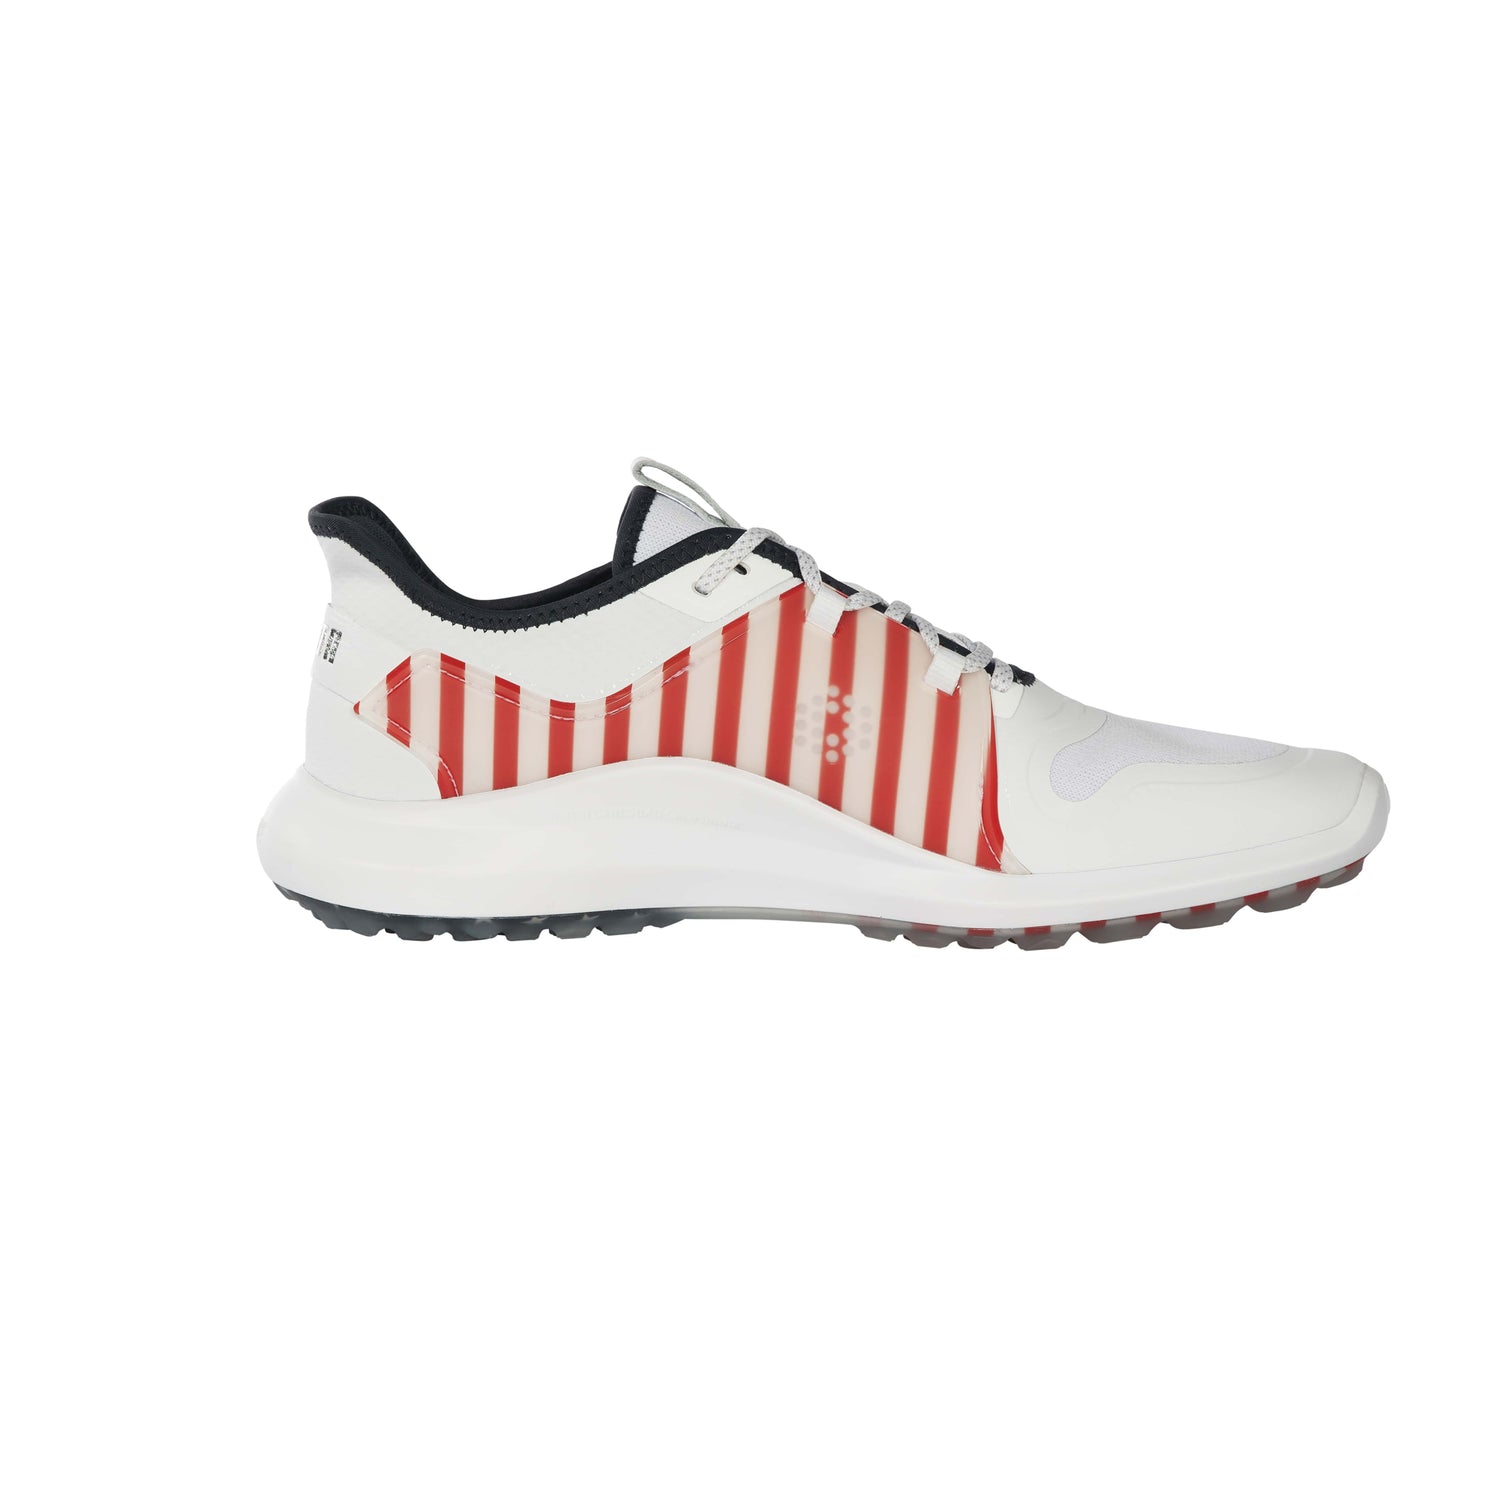 Limited Edition - IGNITE Fasten8 Volition Stars and Stripes Spikeless Golf  Shoes